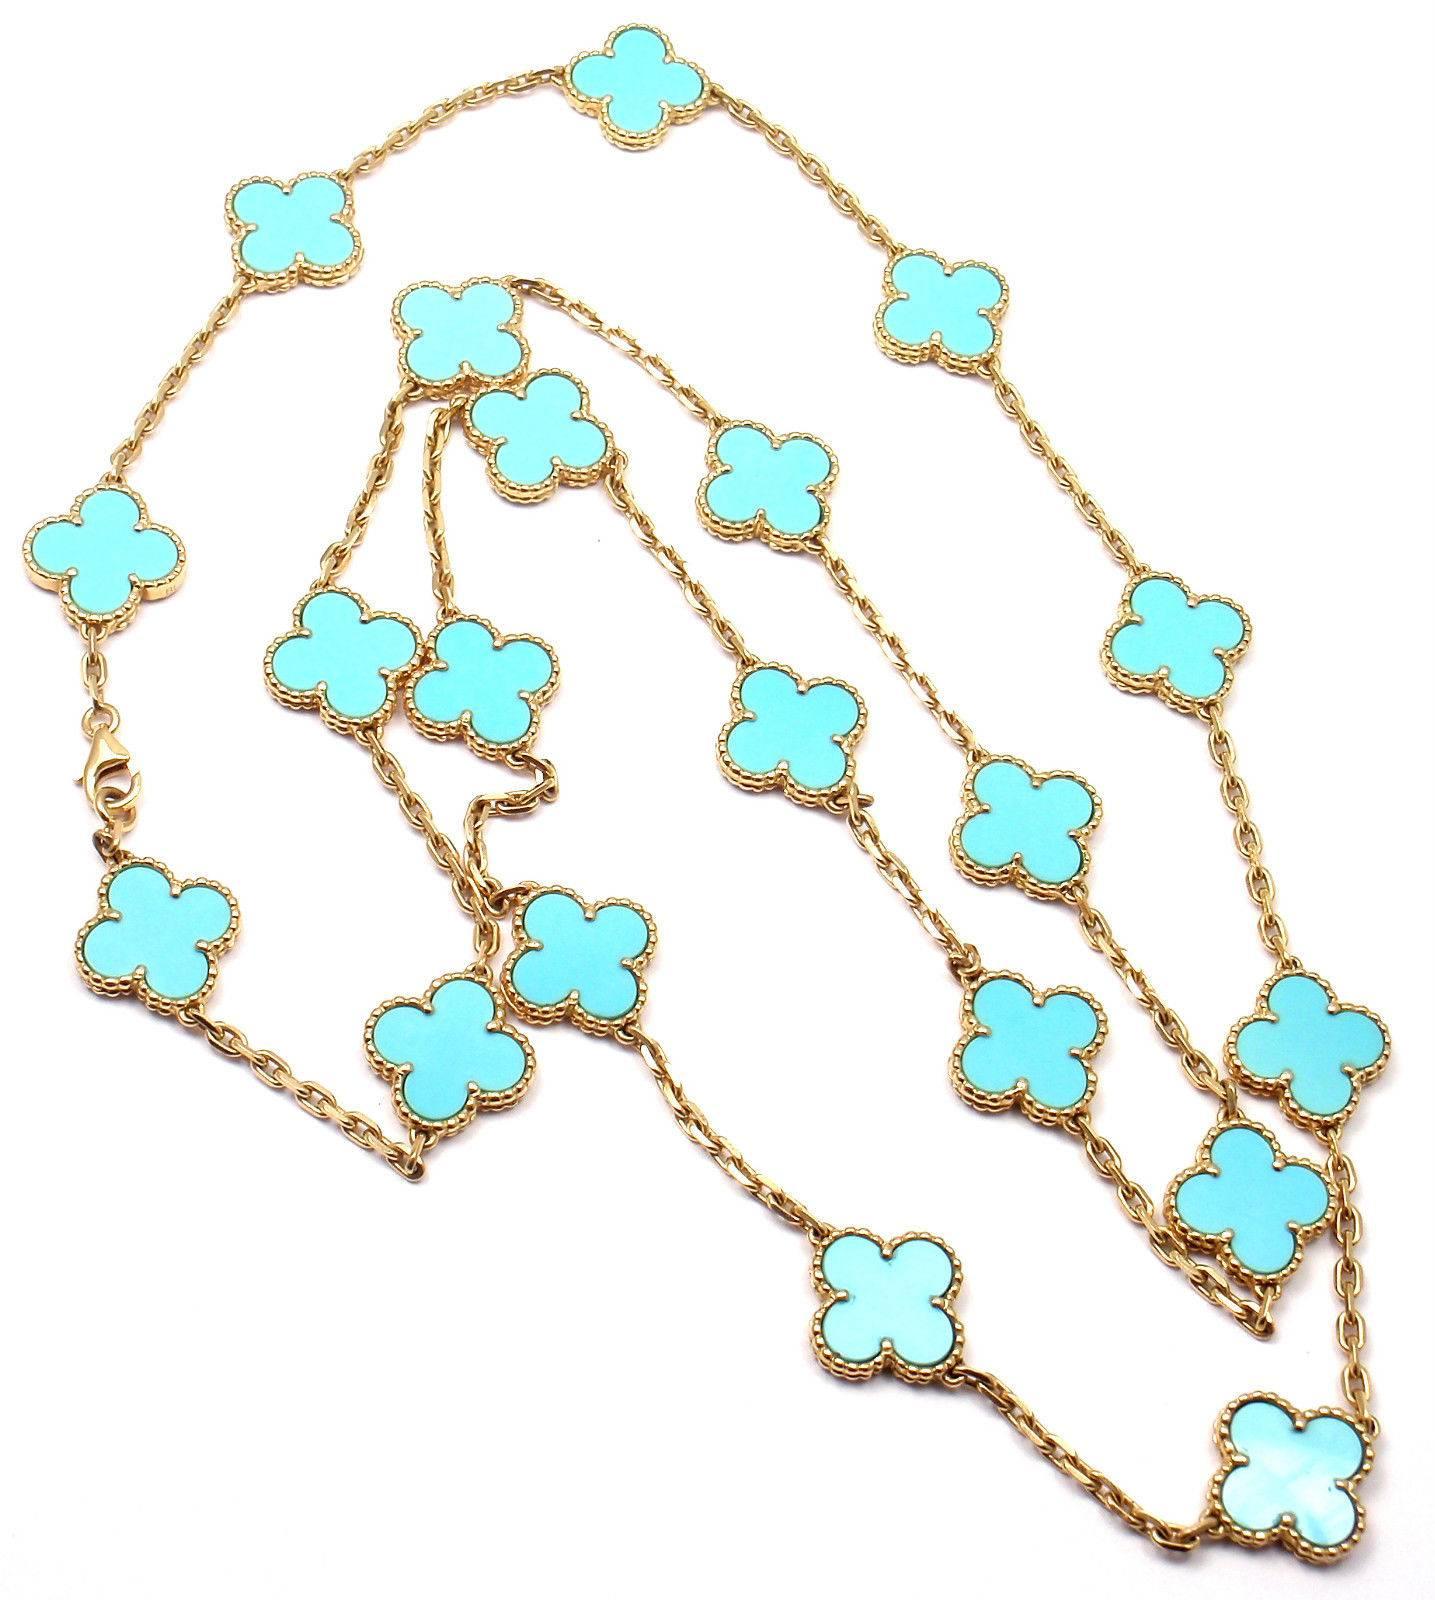 18k Yellow Gold Alhambra Twenty-Motif Turquoise Necklace by
Van Cleef & Arpels, with 20 motifs of Turquoise Alhambra stones, 15mm each.
This necklace comes with Van Cleef & Arpels box and Van Cleef & Arpels certificate.

Details: 
Length: